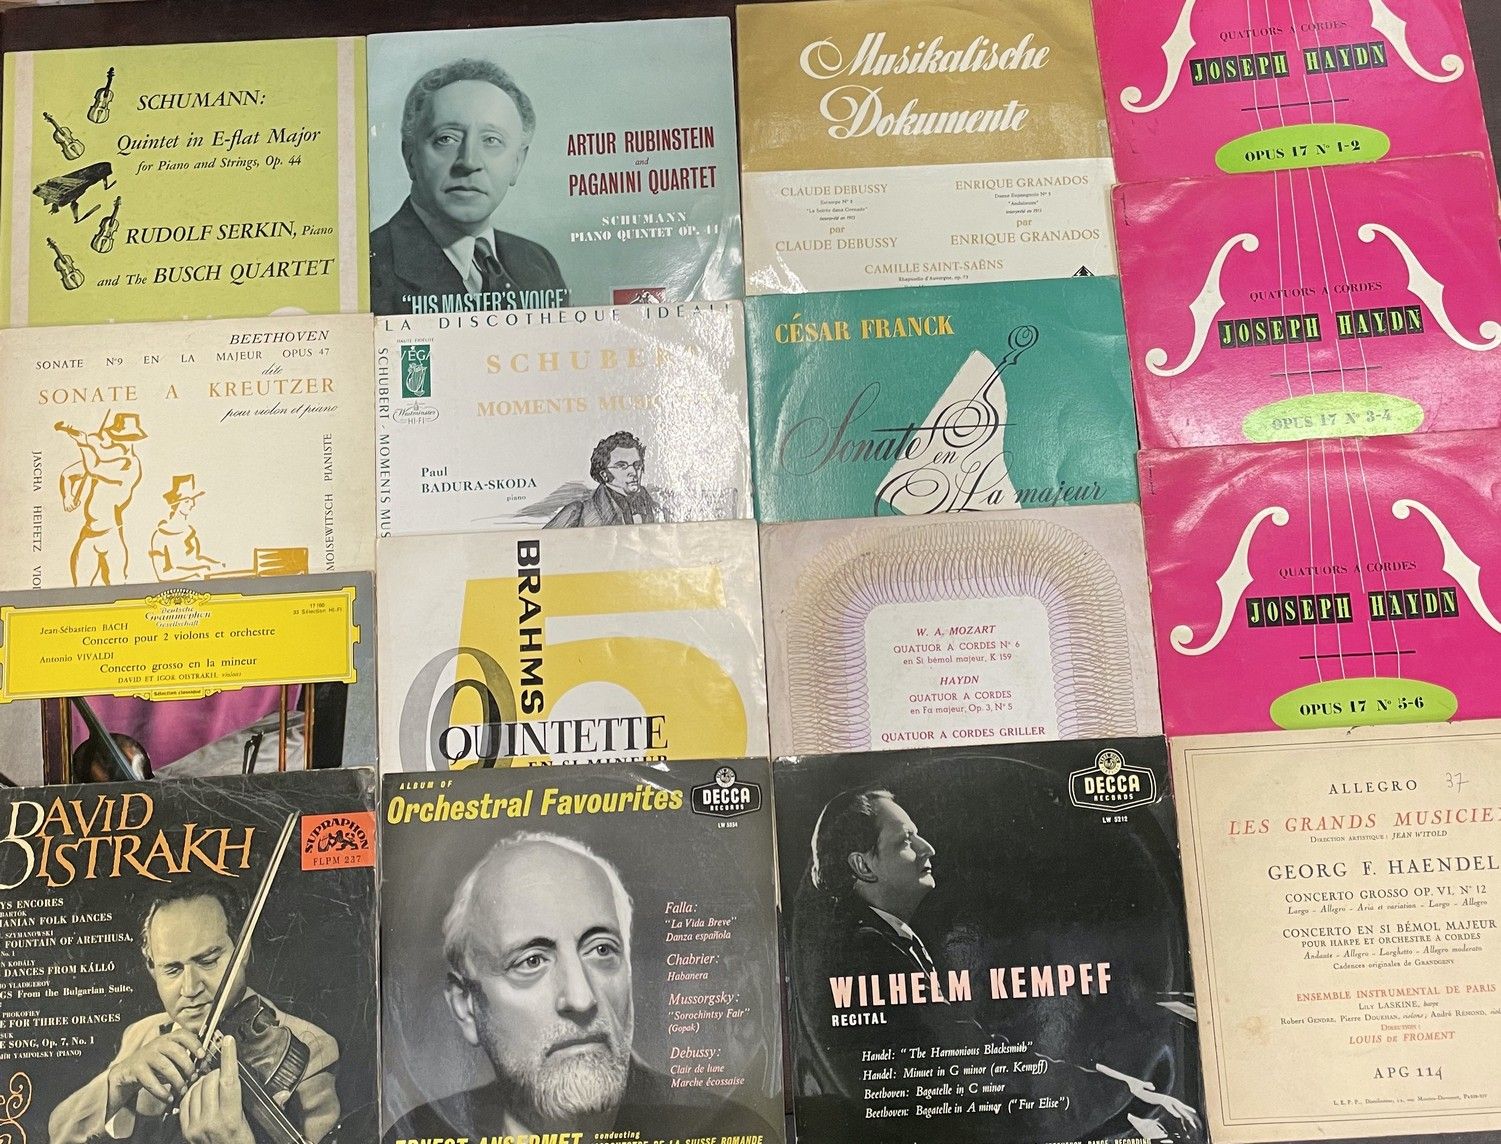 25 cm 16 x 10'' - Classical Music, various Performers, various Labels

VG to EX;&hellip;